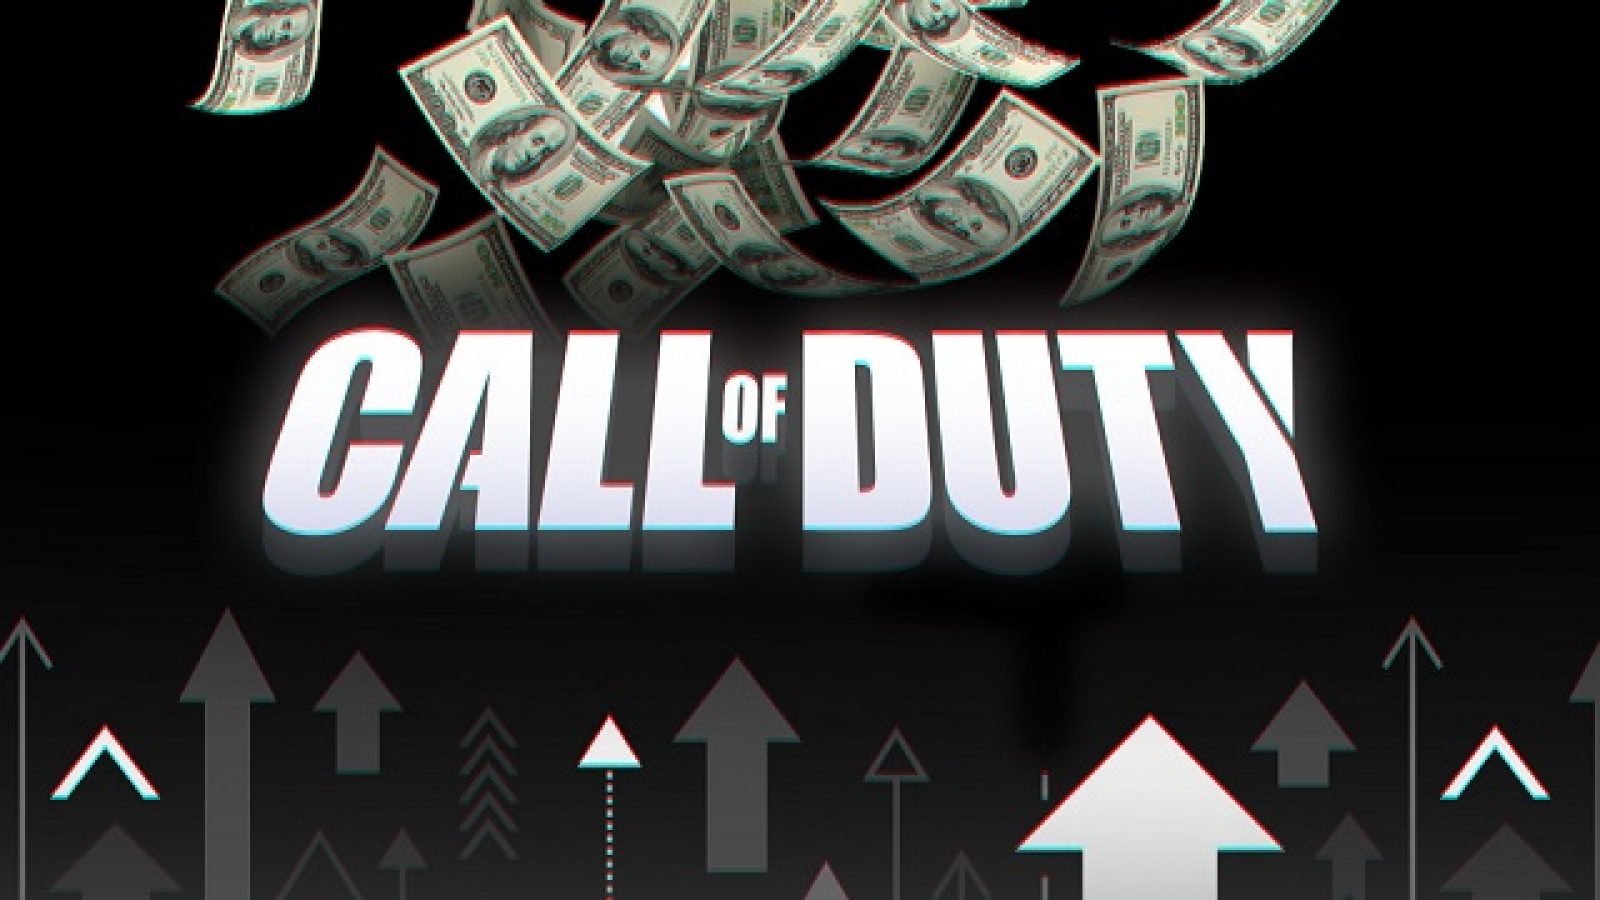 Black Ops 2 and MW3 the last great Call of Duty games, sales figures